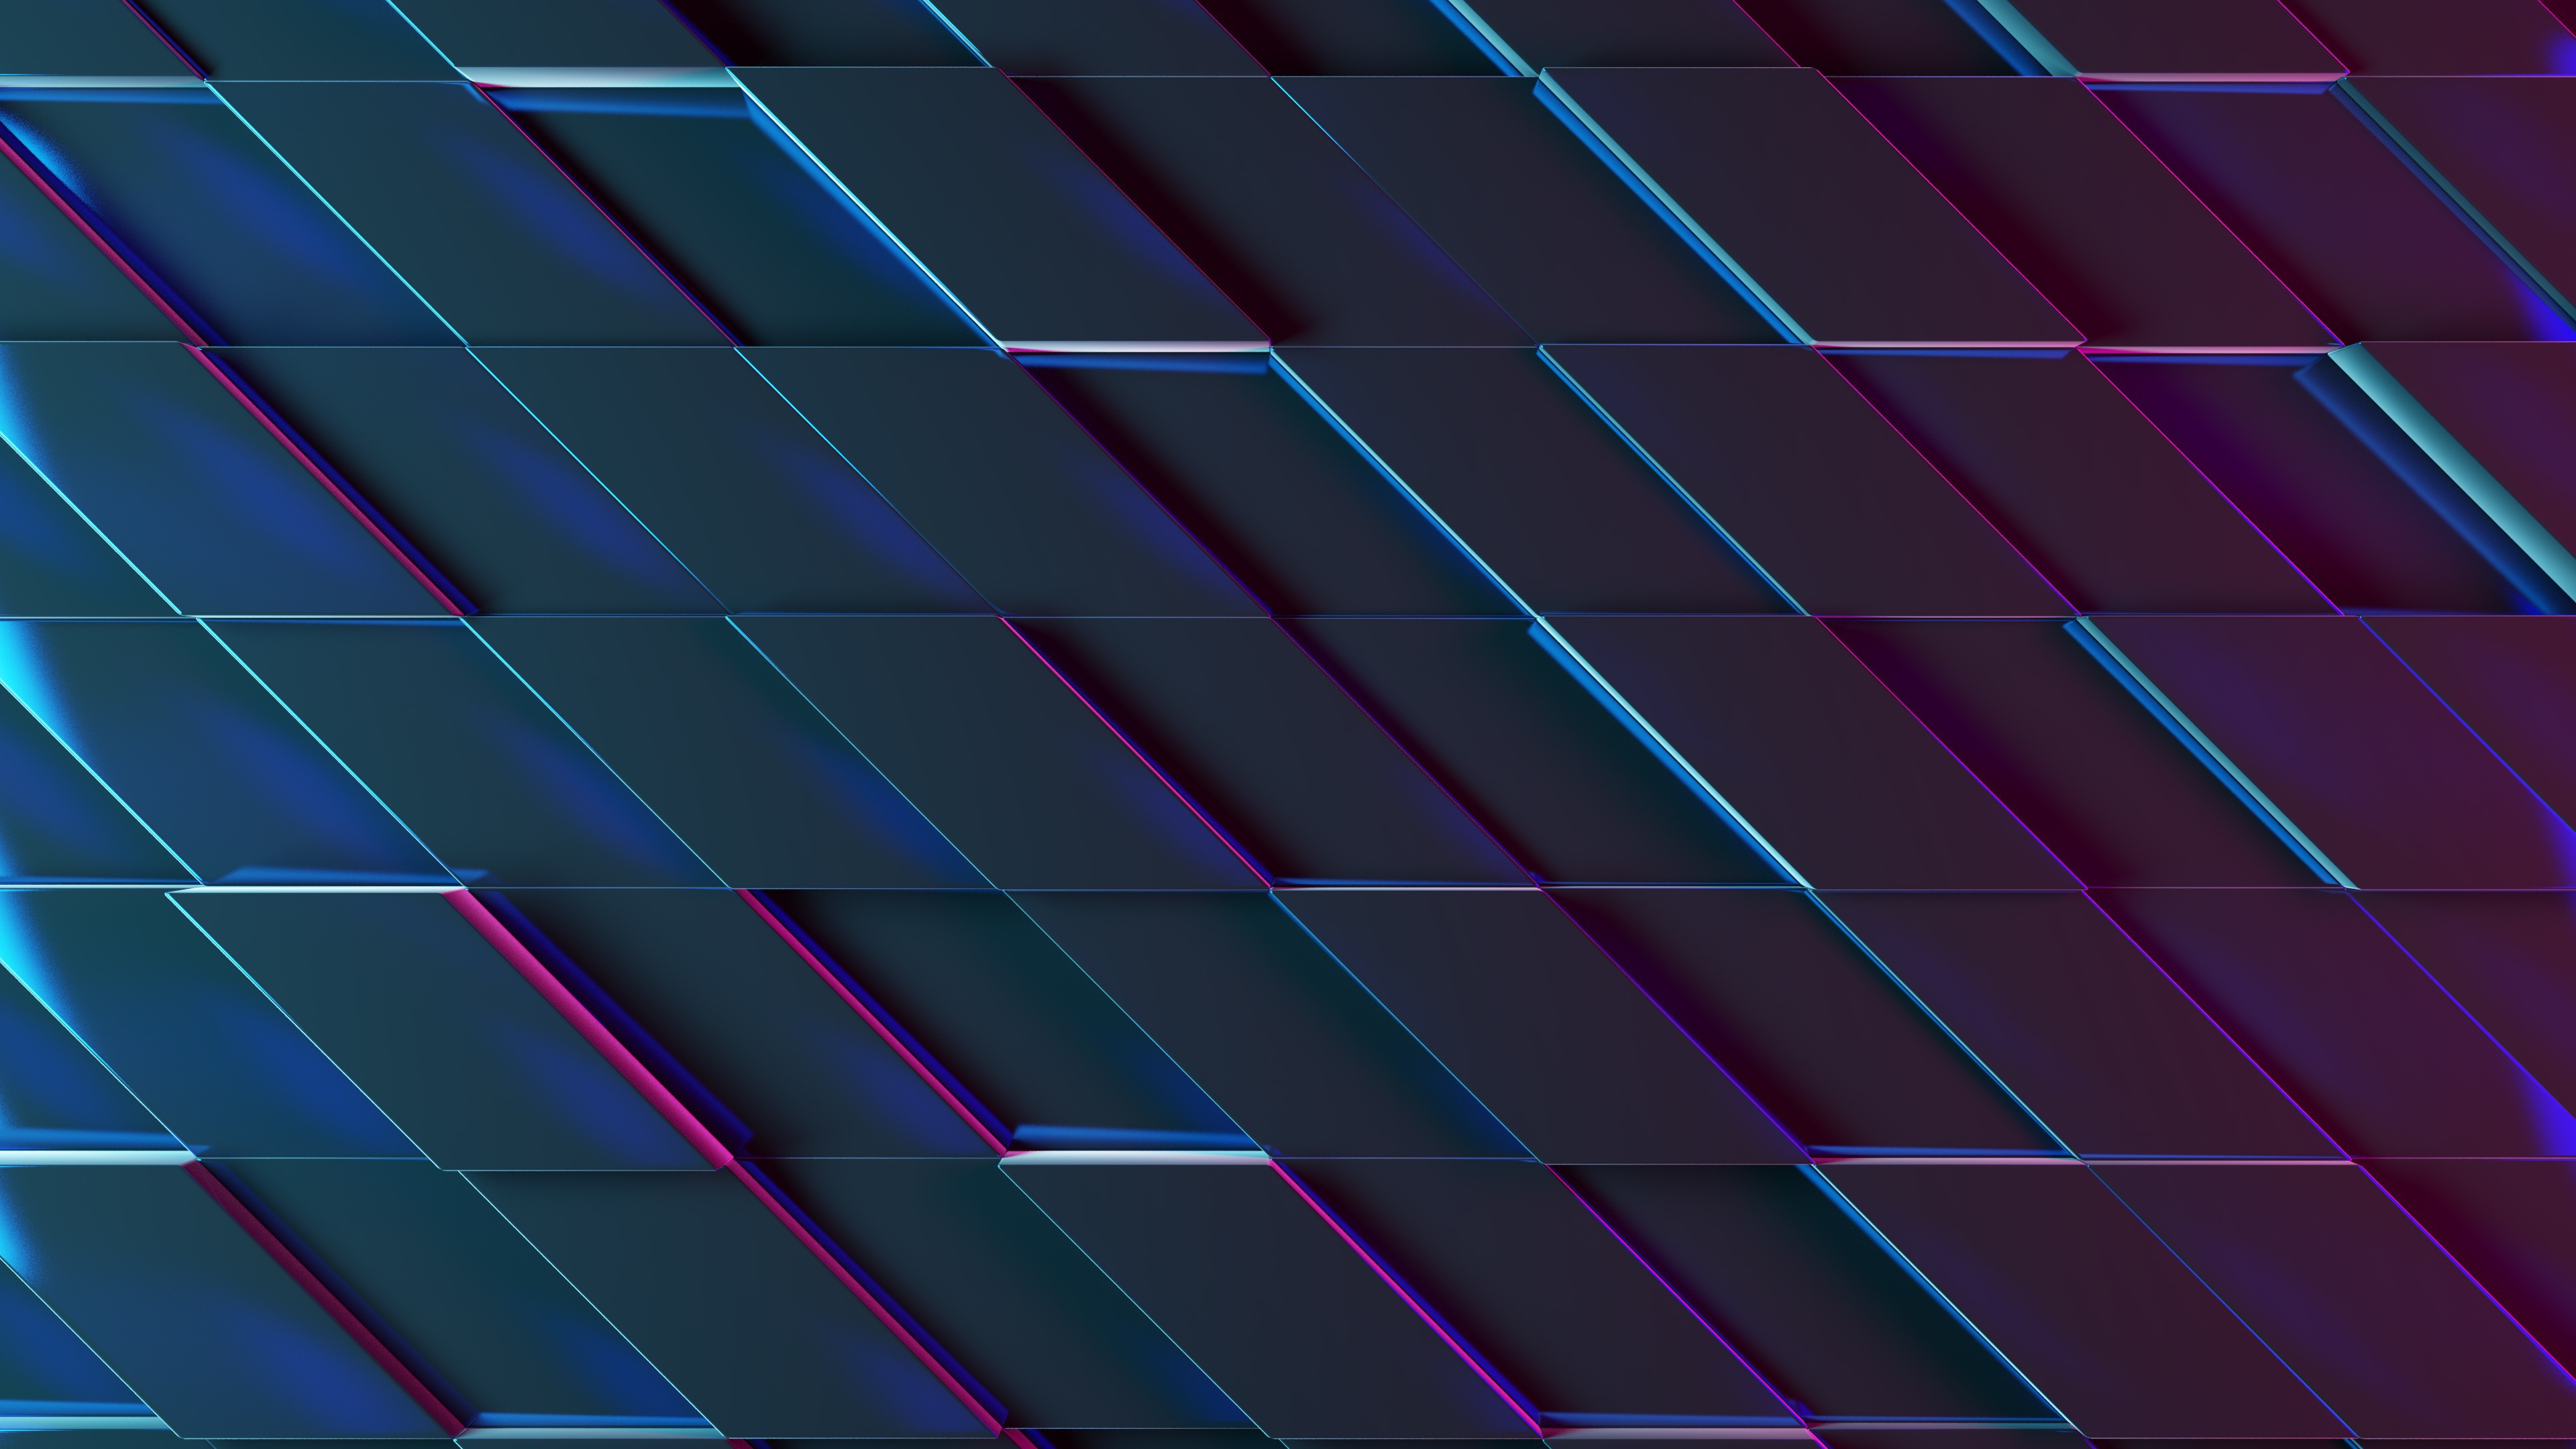 A geometric glass pattern with a blue and purple gradient